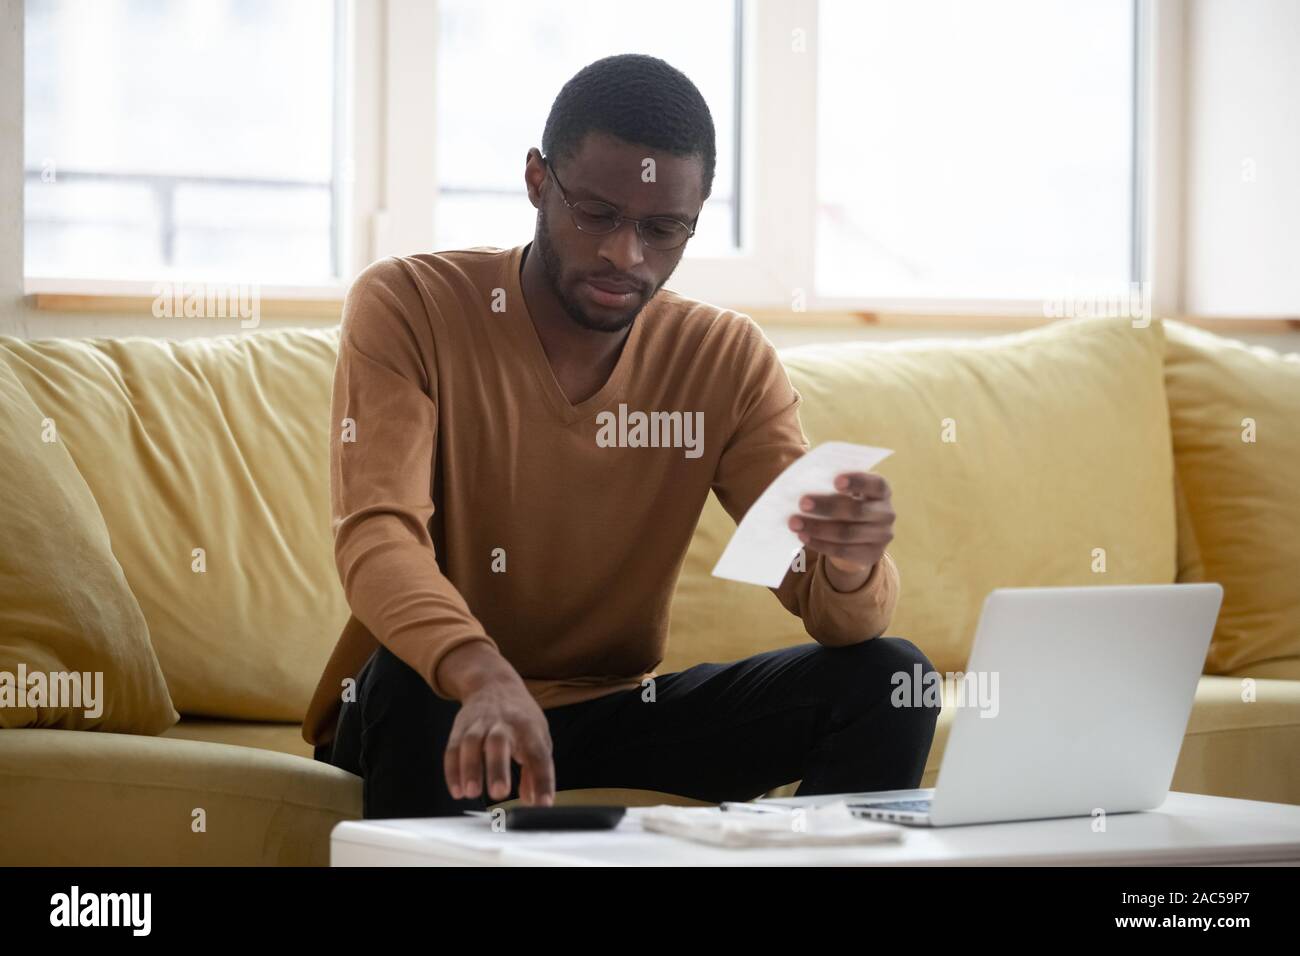 Concentrated biracial man calculating household expenses at home Stock Photo